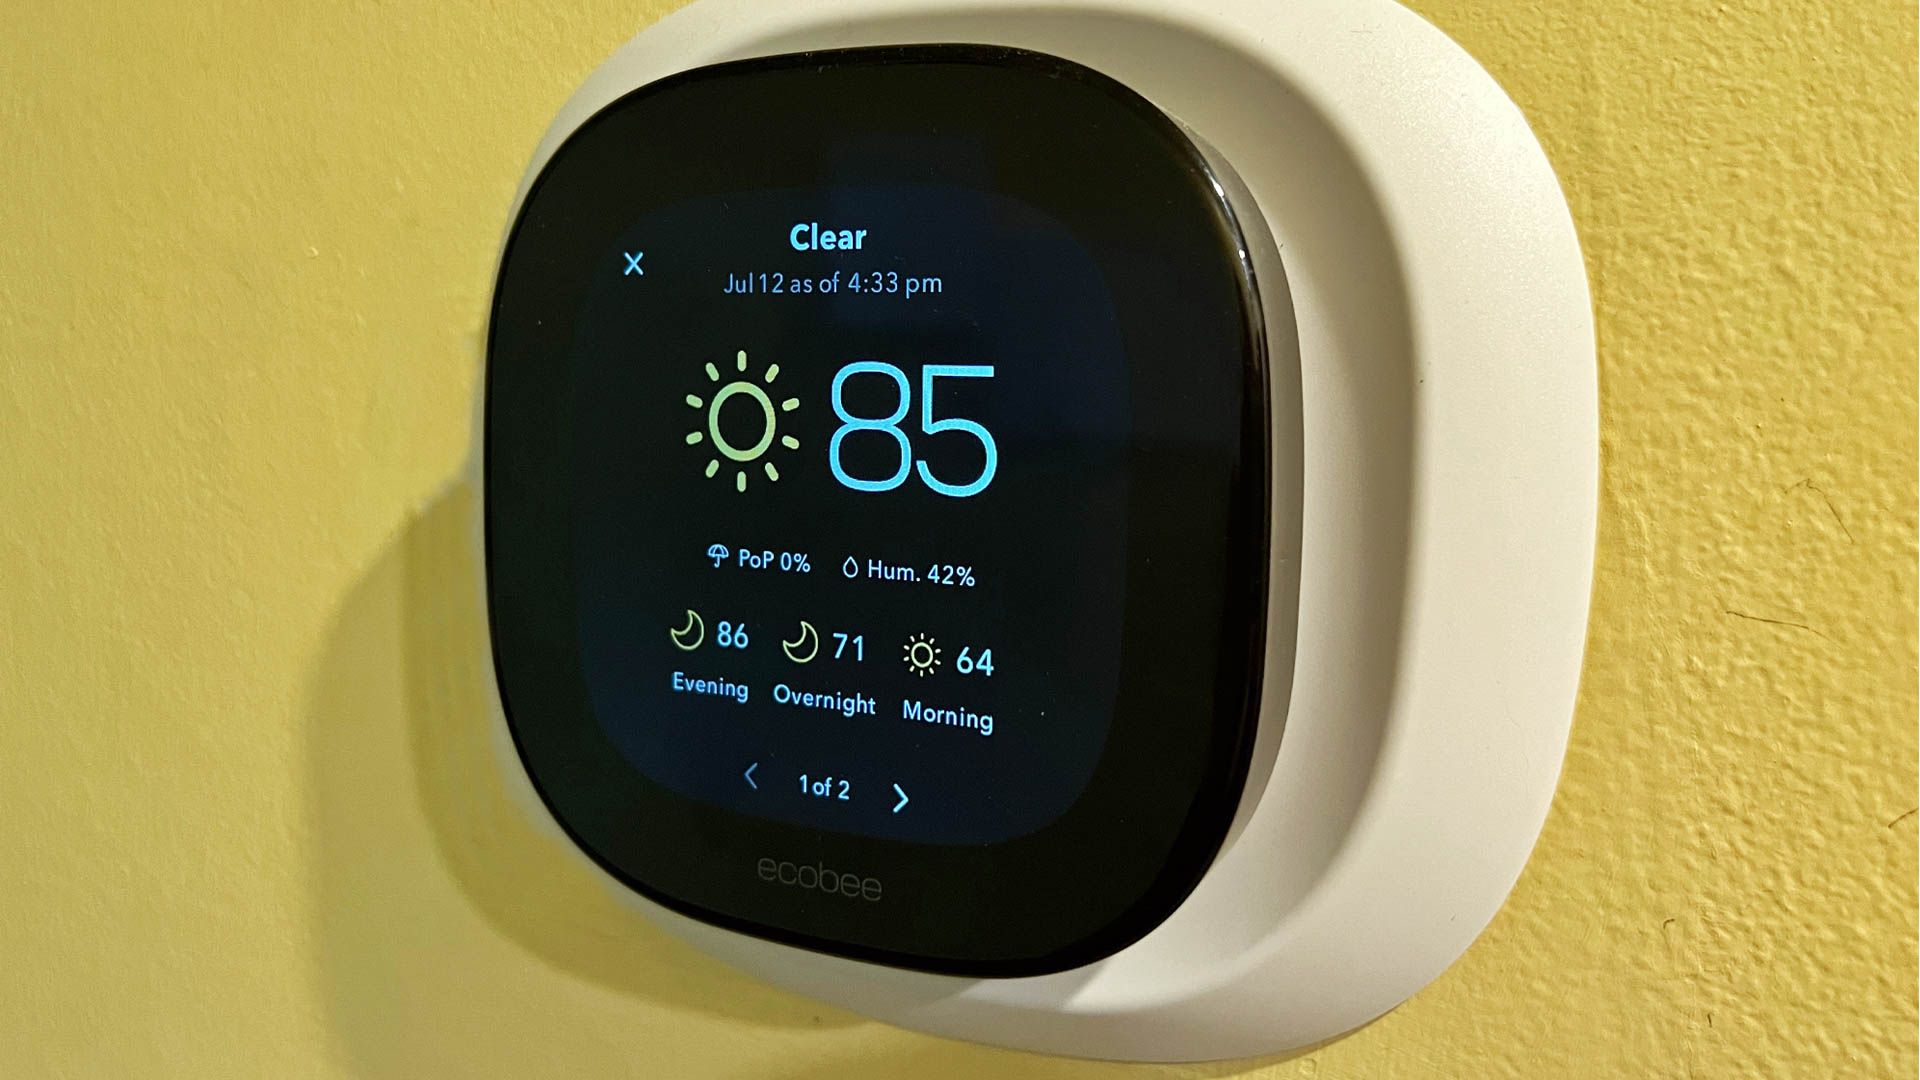 An ecobee smart thermostat displaying weather